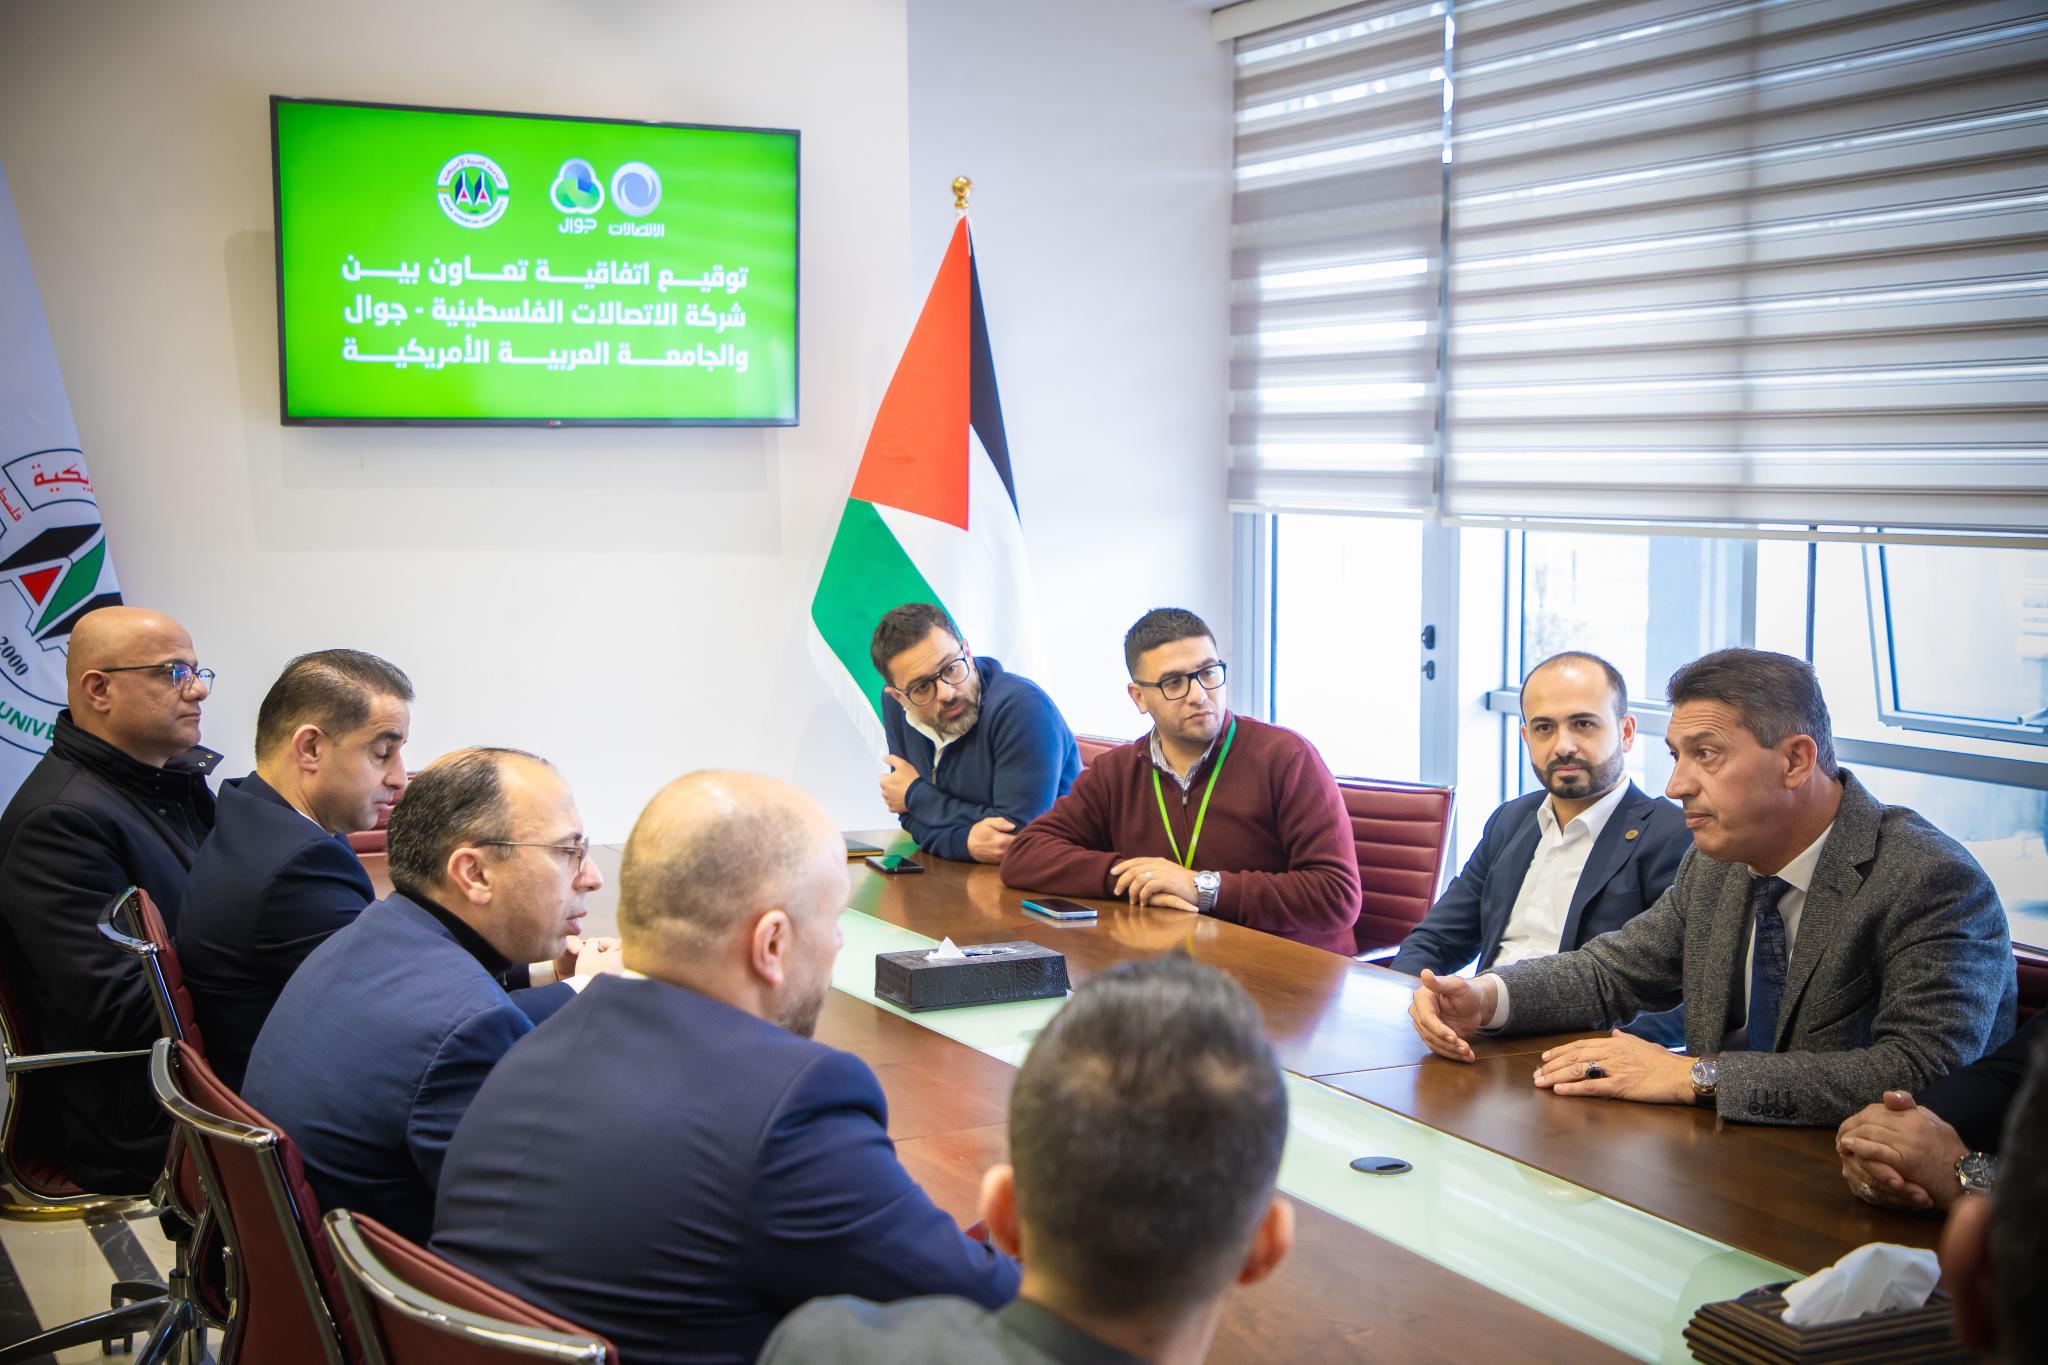 The 鶹ƵӰ and the Palestinian Telecommunications Company Jawwal Sign a Memorandum of Understanding